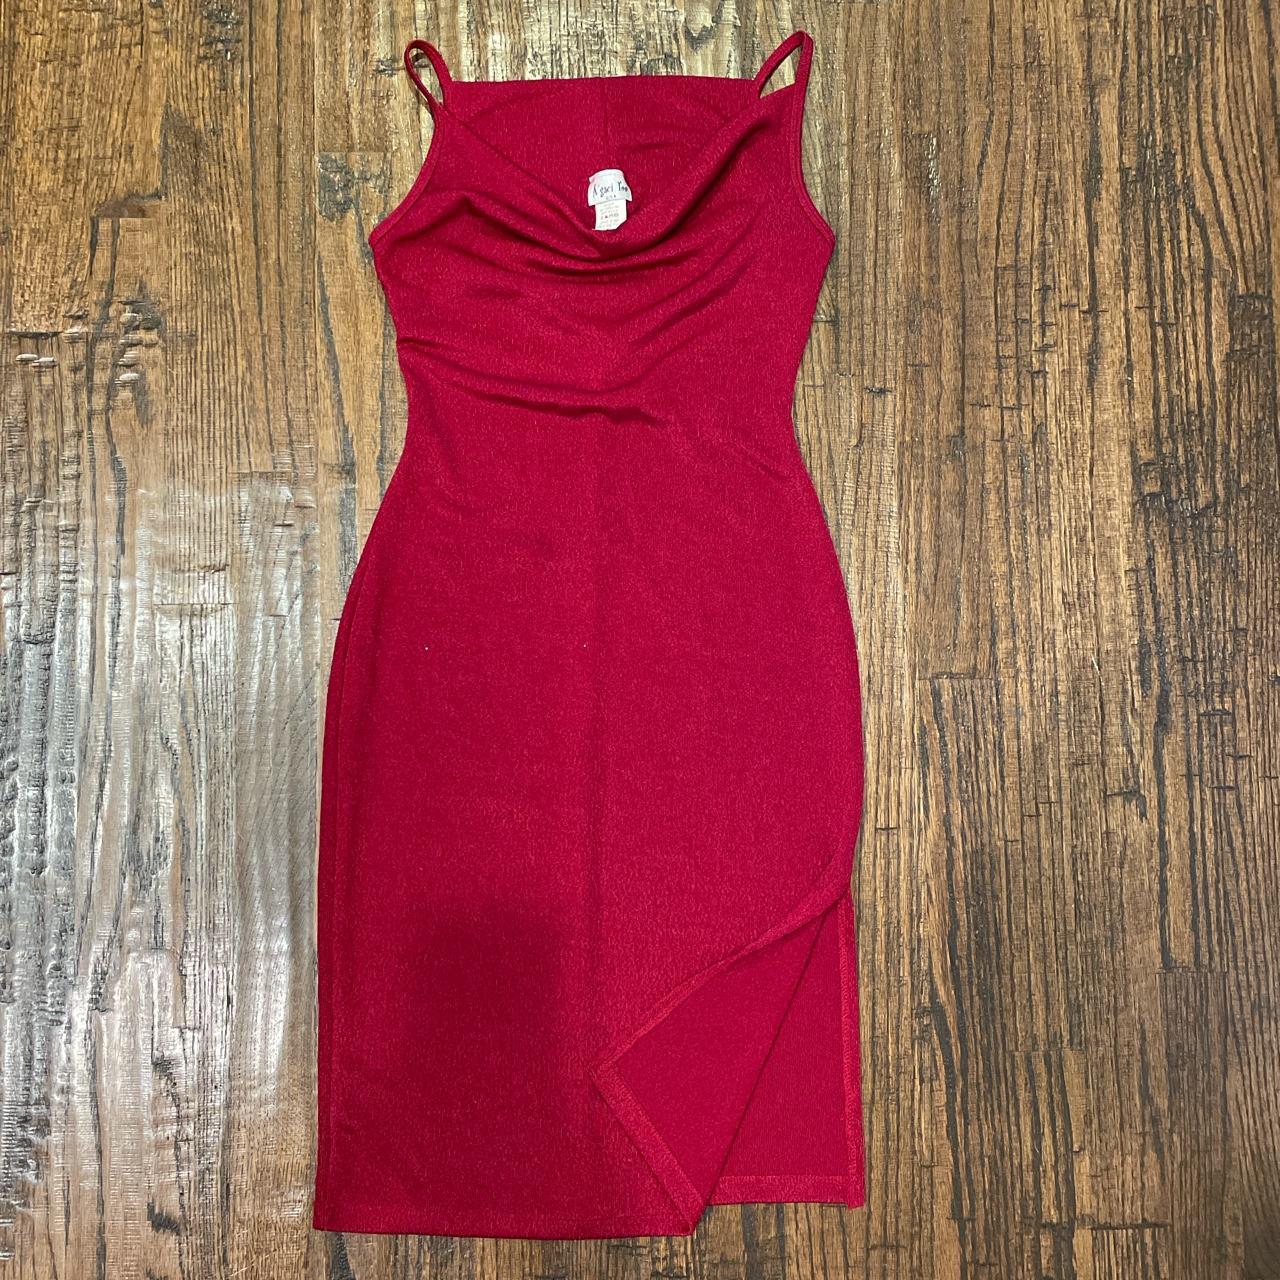 Hot Kiss Women's Red and Burgundy Dress